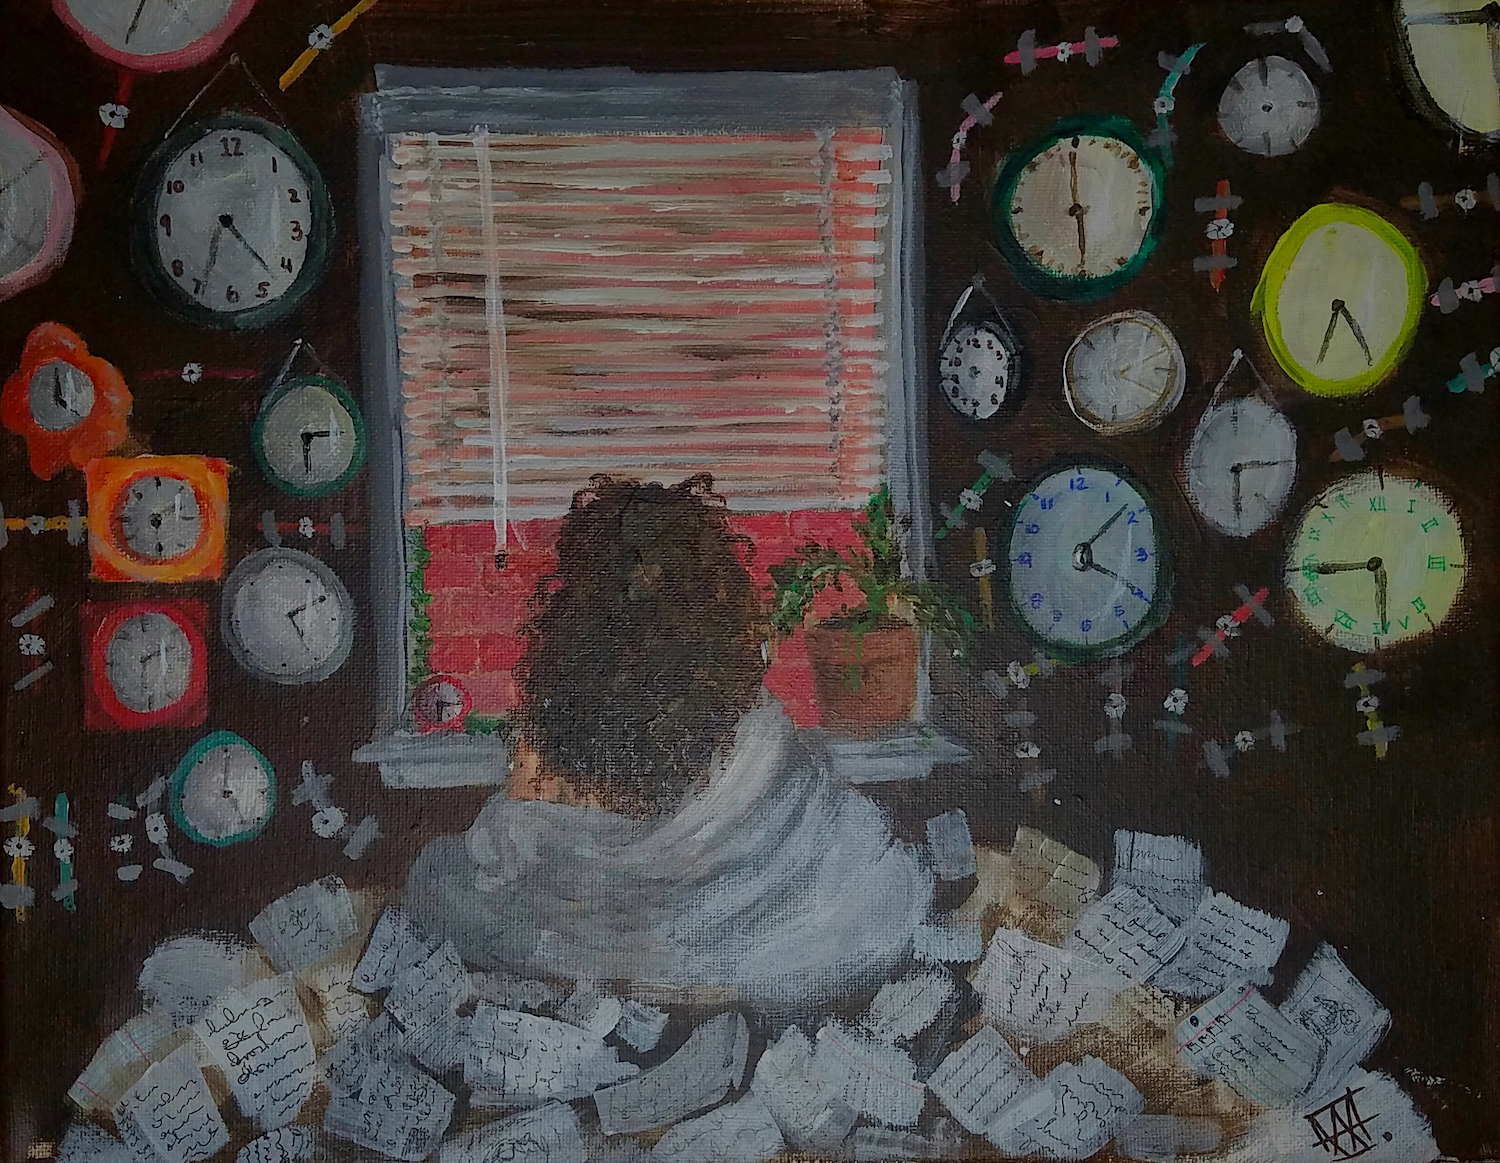 thumbnail of Ticking by Heaven Velasquez. Medium: Acrylic on canvas. Size 11 x 14 inches Date 2020